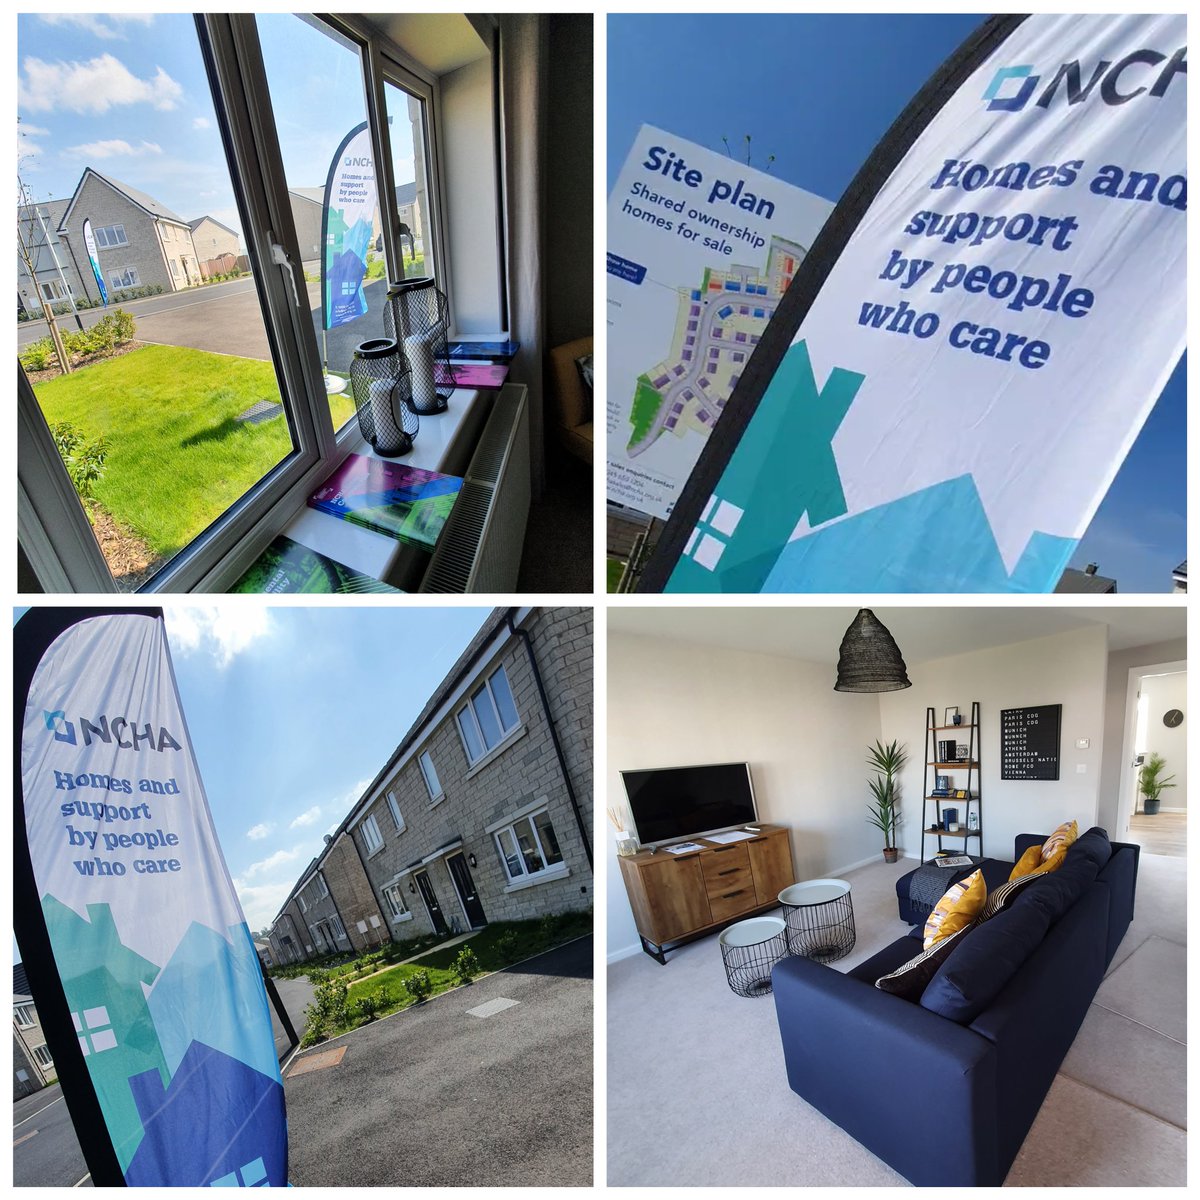 Big blue skies for the opening of our 73 new #AffordableHomes in #Buxton.
Available for #AffordableRent and #SharedOwnership 
More photos to follow ...
@NottsCommHA @HighPeakBC @HomesEngland